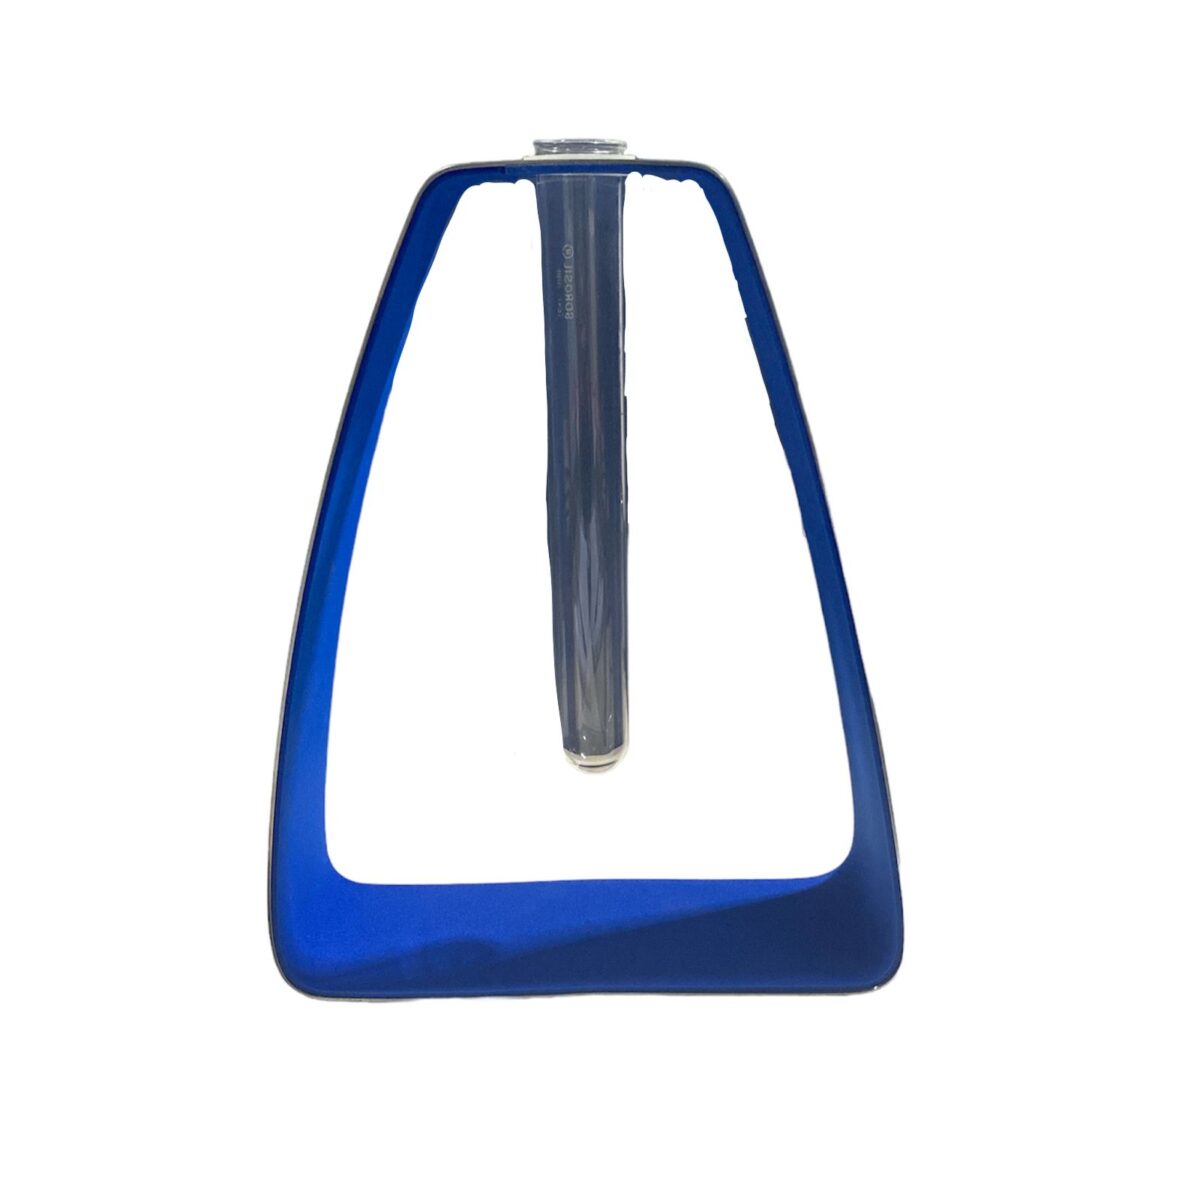 The Triangular Vase with Blue Felt is a contemporary vase with a unique triangular shape, complemented by a blue felt base for added style and protection. This vase is an eye-catching and versatile decorative piece that can enhance your home decor with its modern design..This suggests that the vase has a three-sided shape, similar to a triangle. Triangular vases can have a modern and geometric design, adding a contemporary touch to any space.